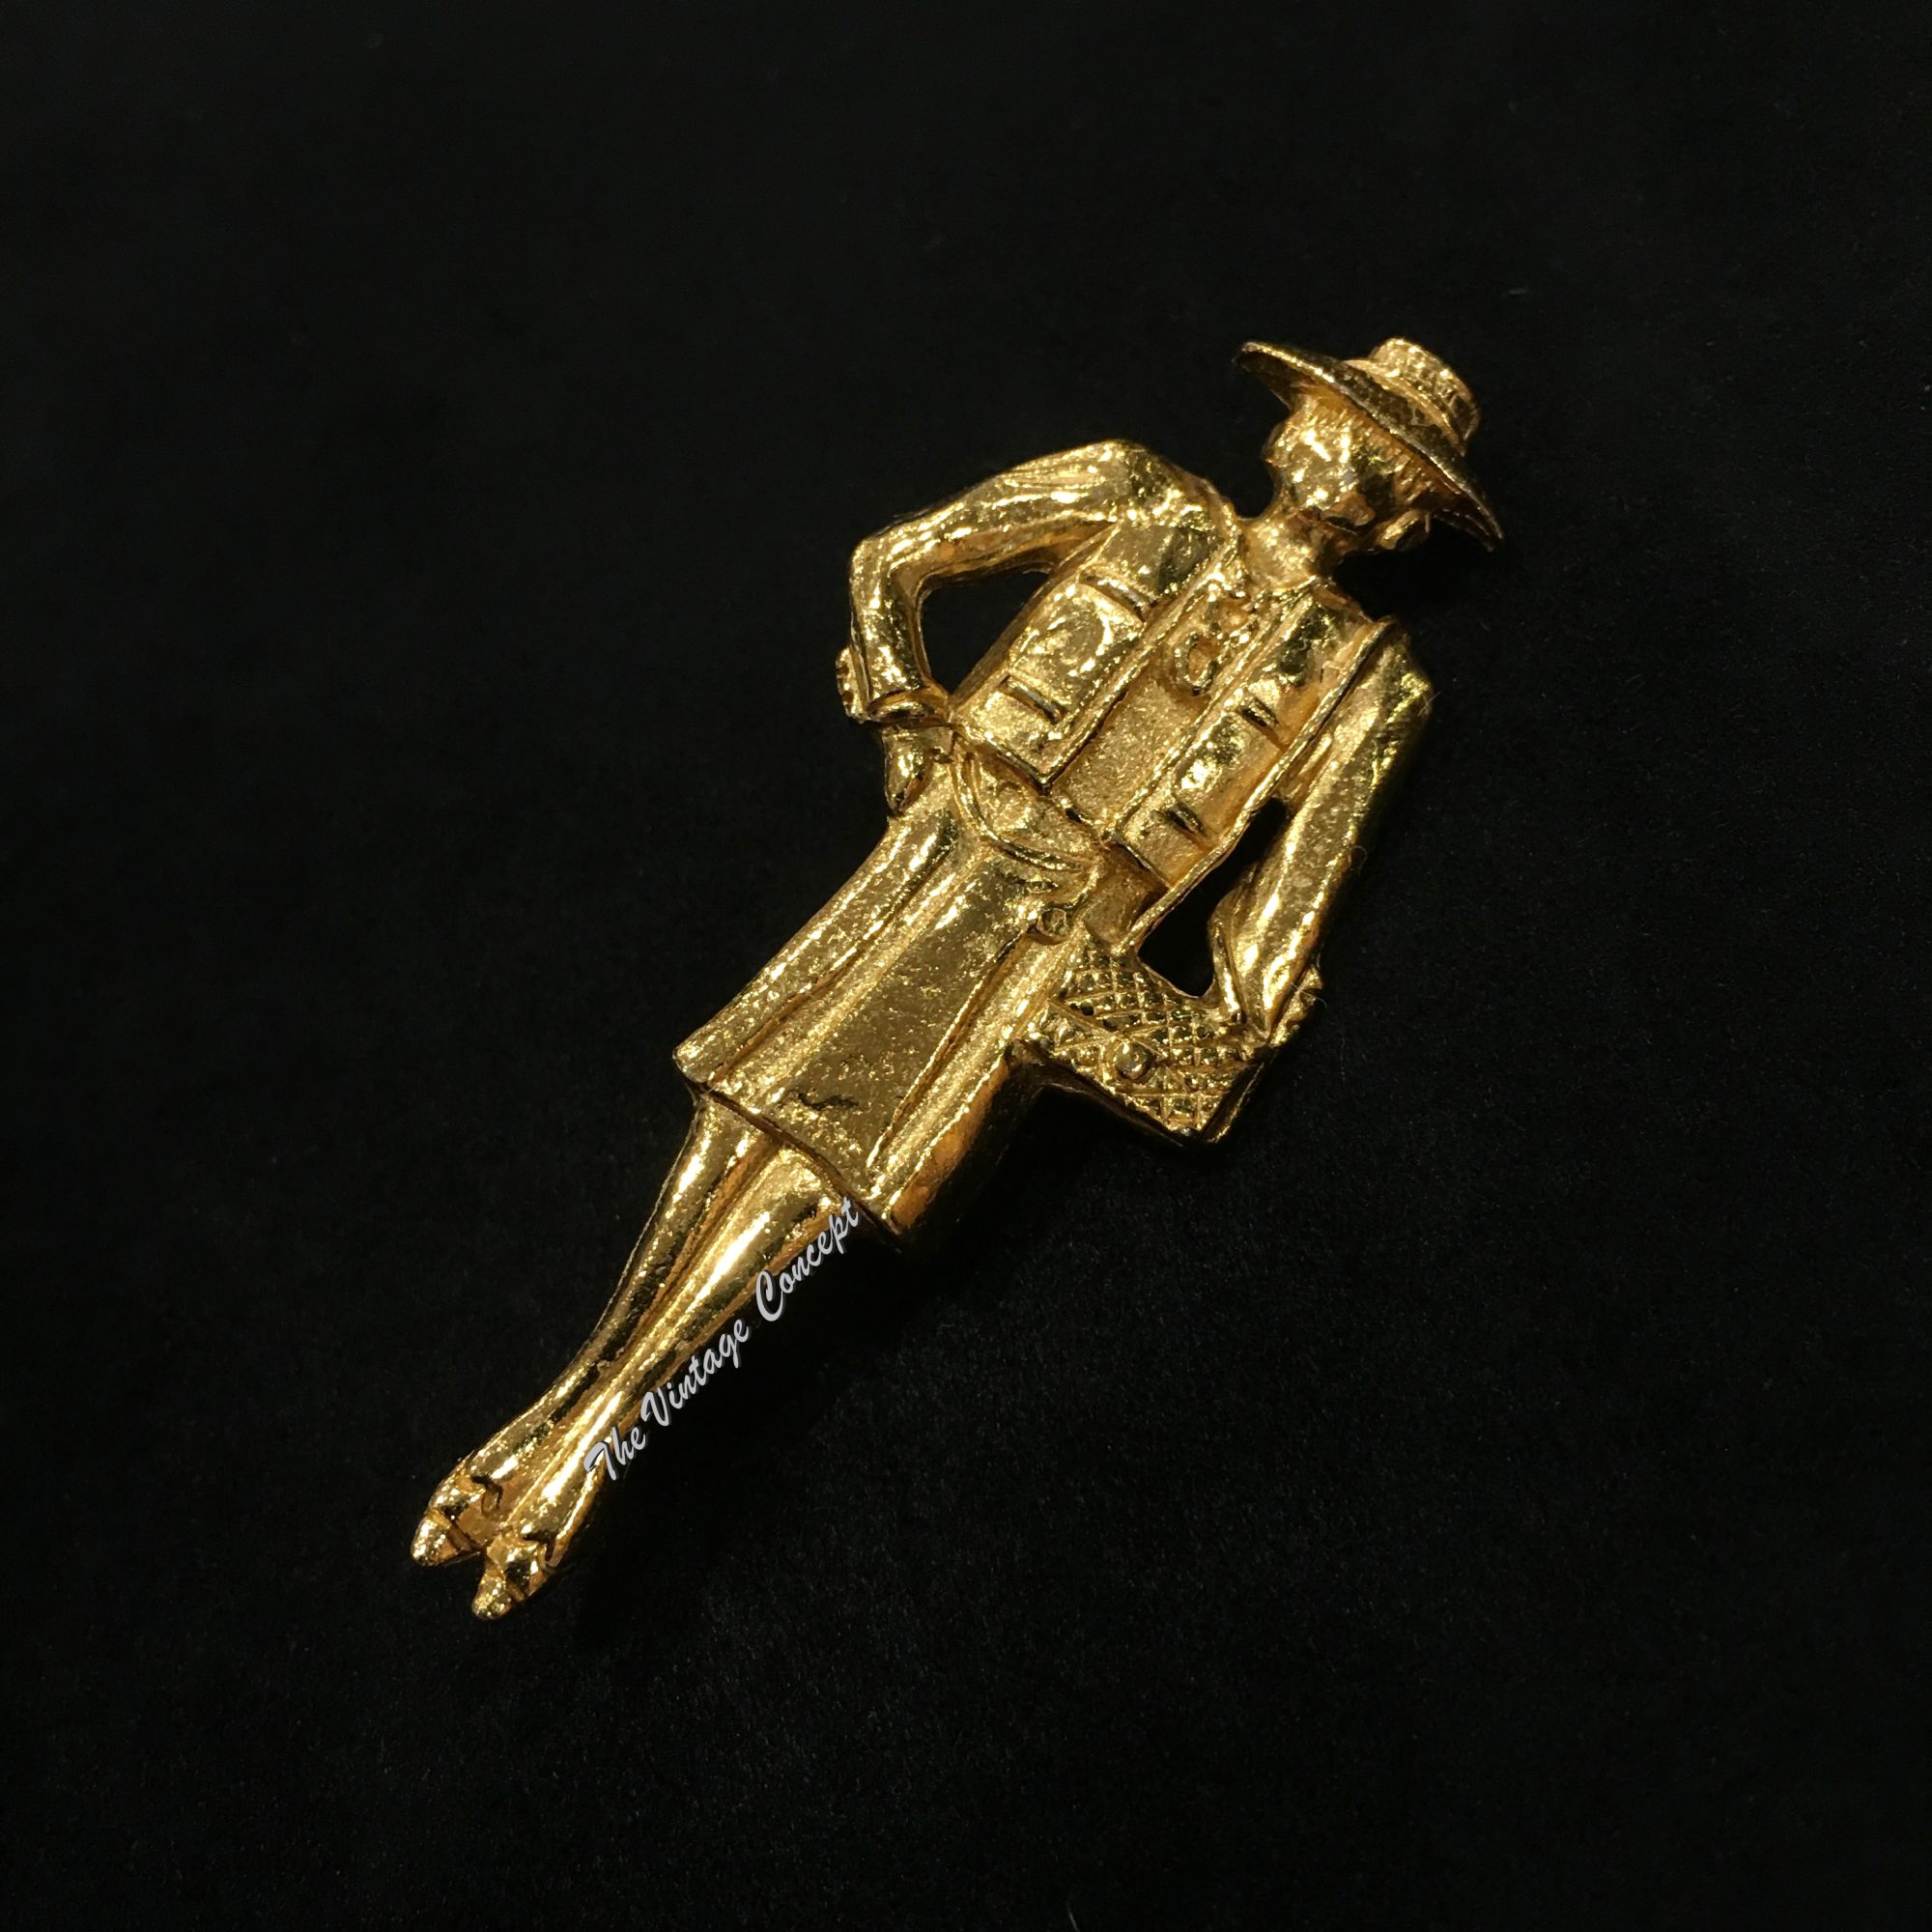 Chanel Gold Tone Coco Chanel Gabrielle Mademoiselle Brooch Pin from 80's (SOLD) - The Vintage Concept